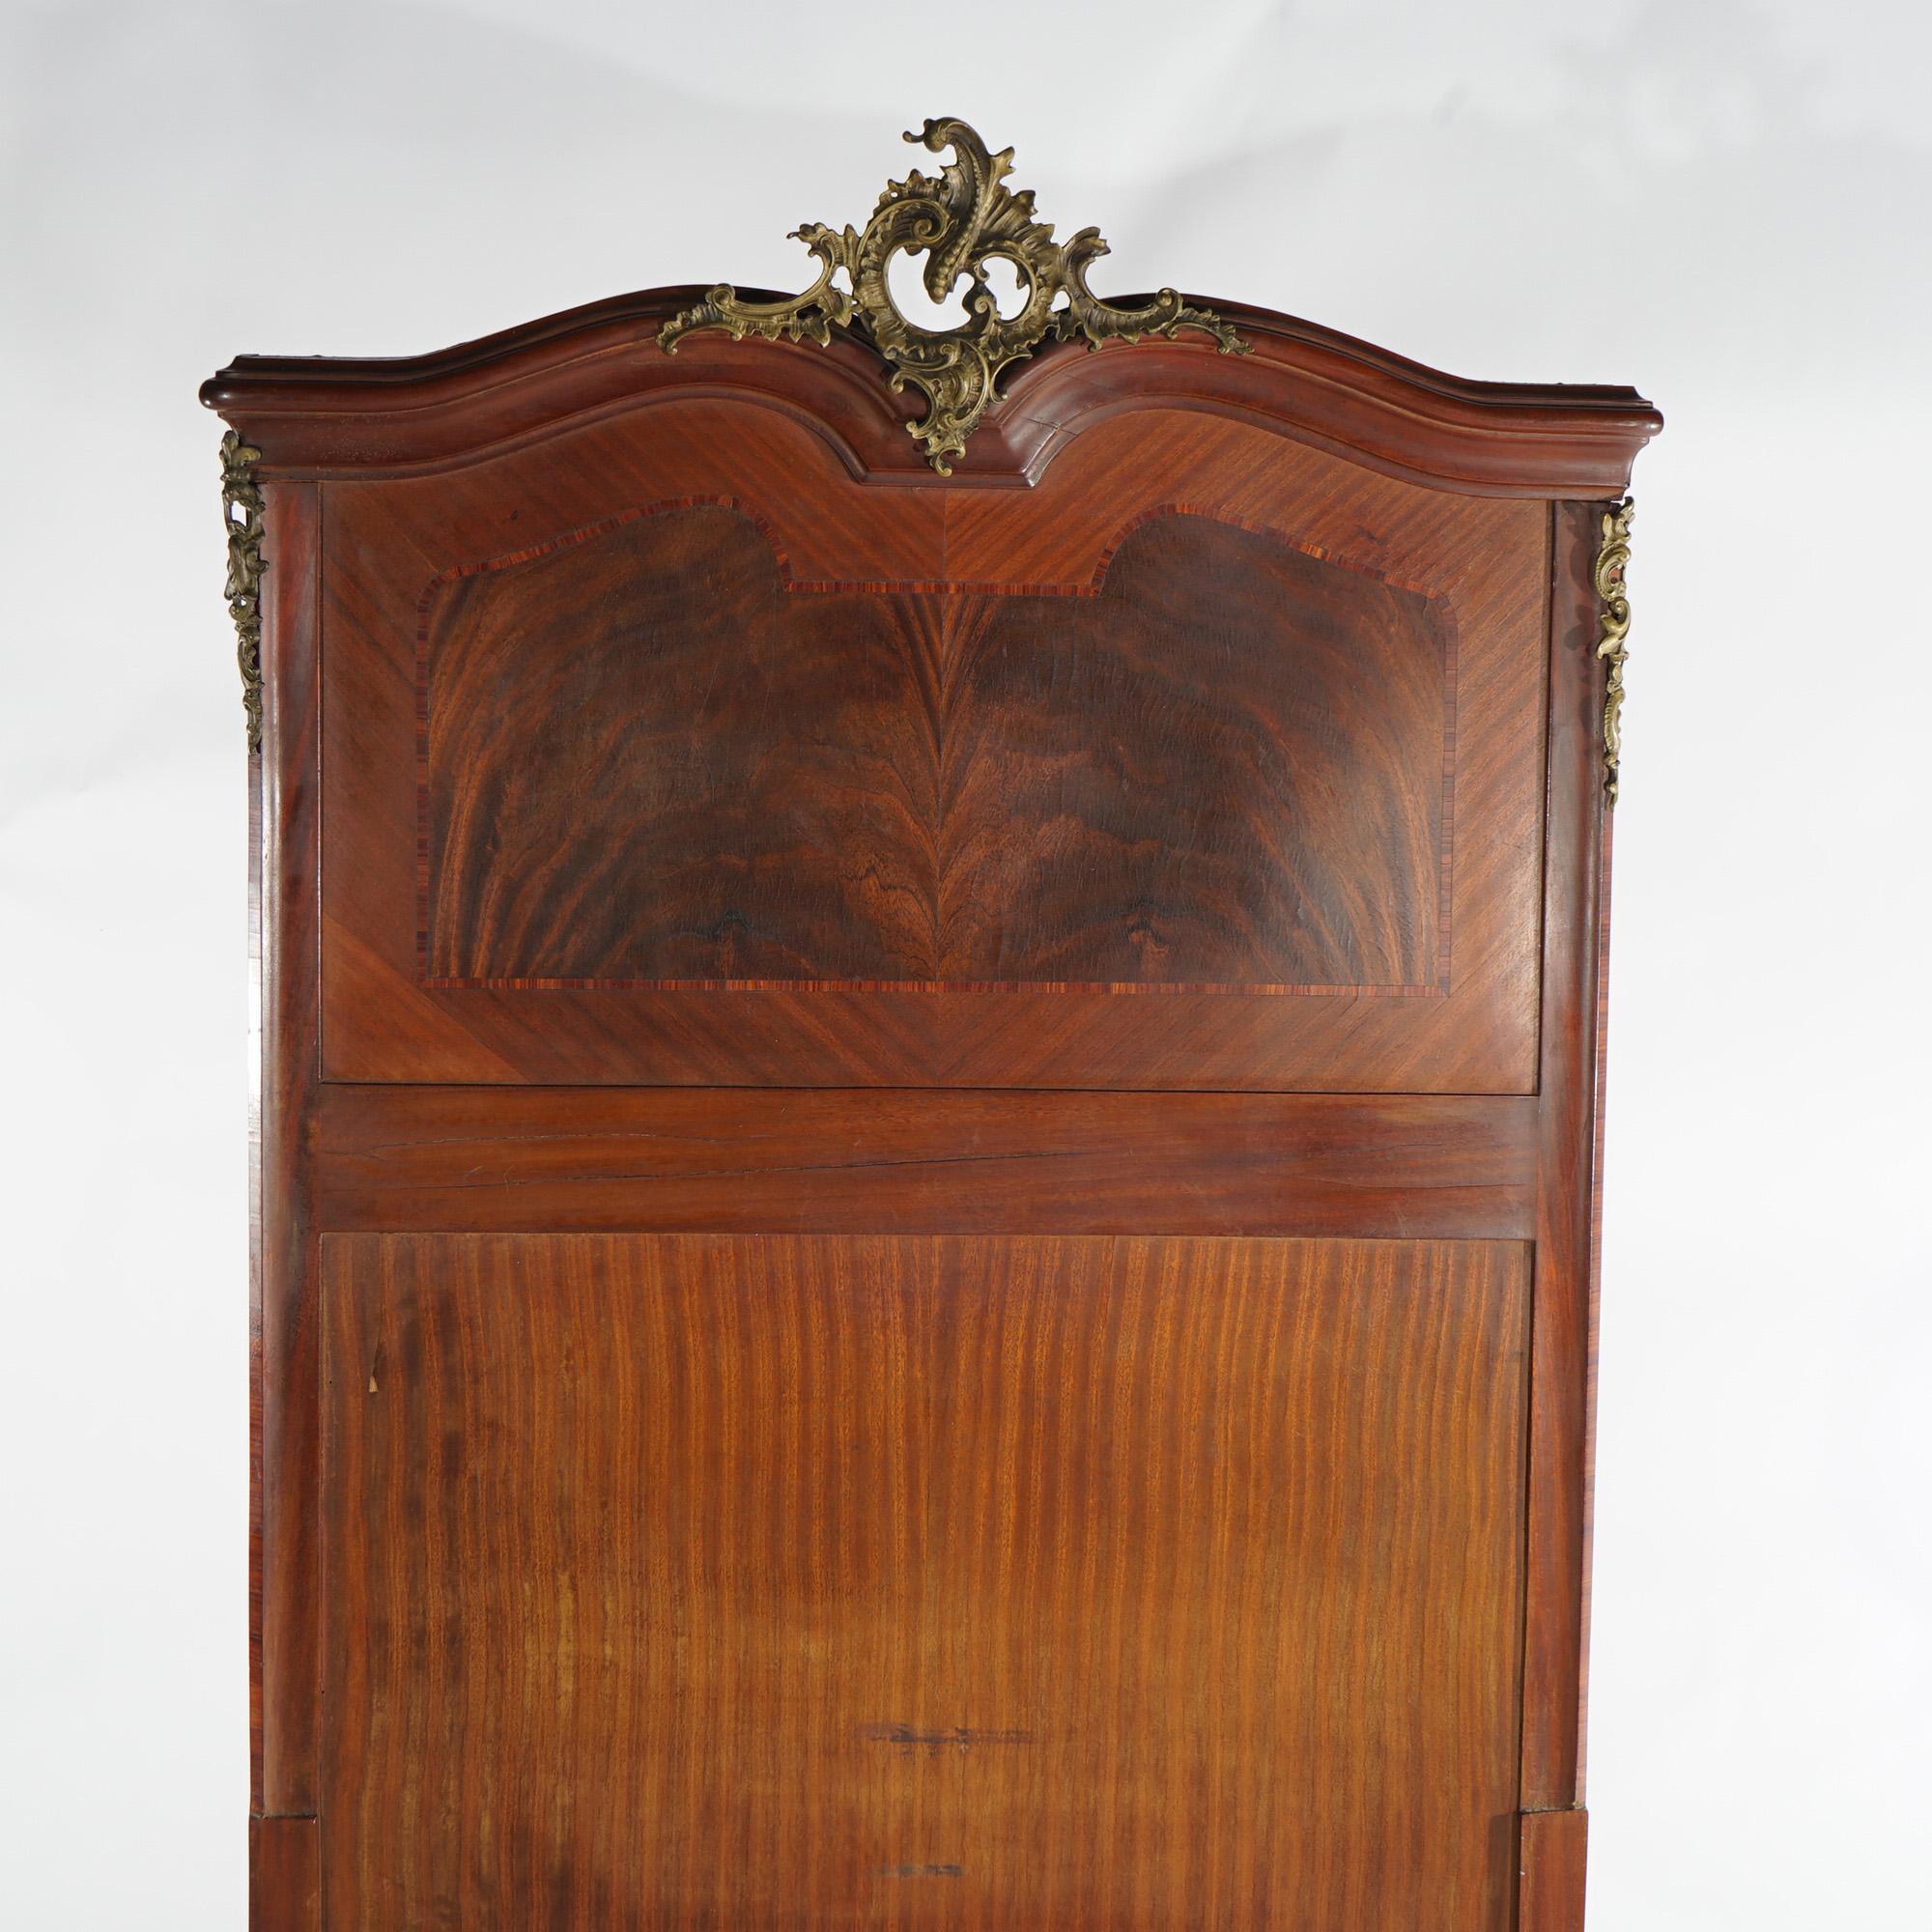 An antique pair of twin or single bed headboards offer rosewood and kingwood inlaid construction with shaped crest having foliate and gadroon cast ormolu mounts; set includes Hollywood bed frames; 20th century

Measures - 66